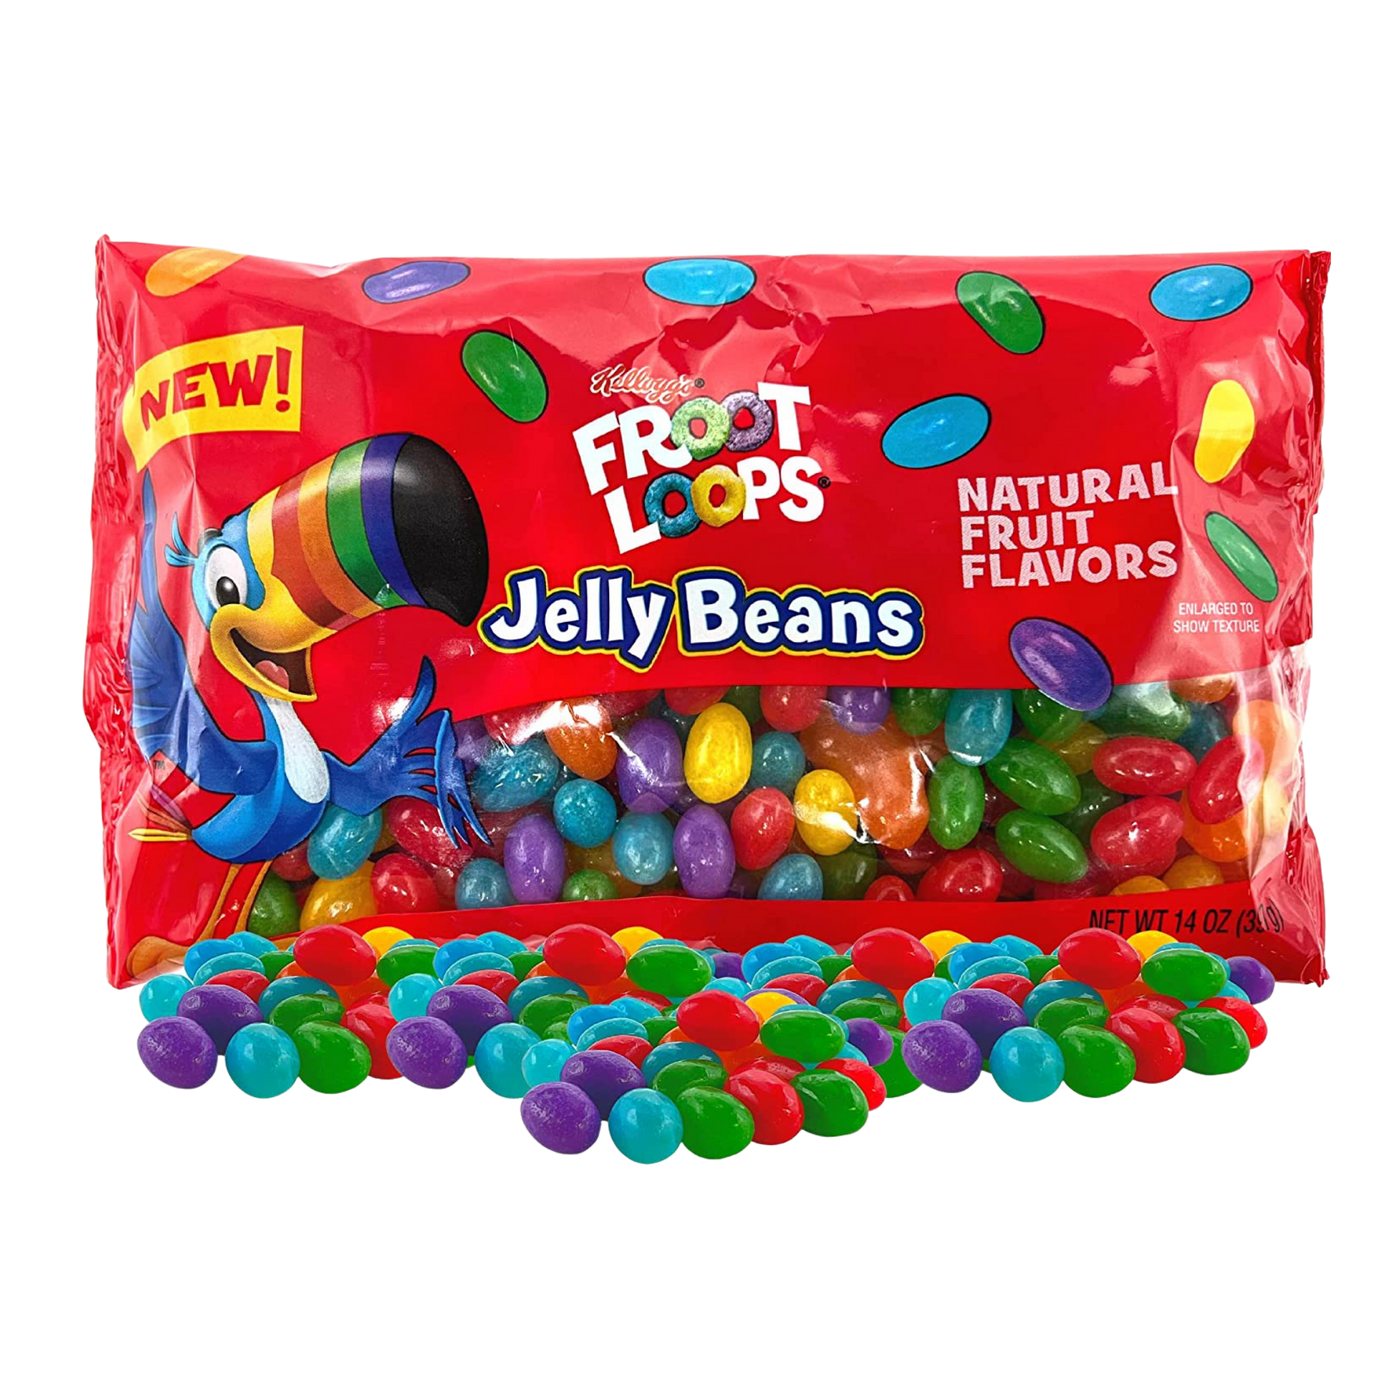 Froot Loops - Jelly Beans